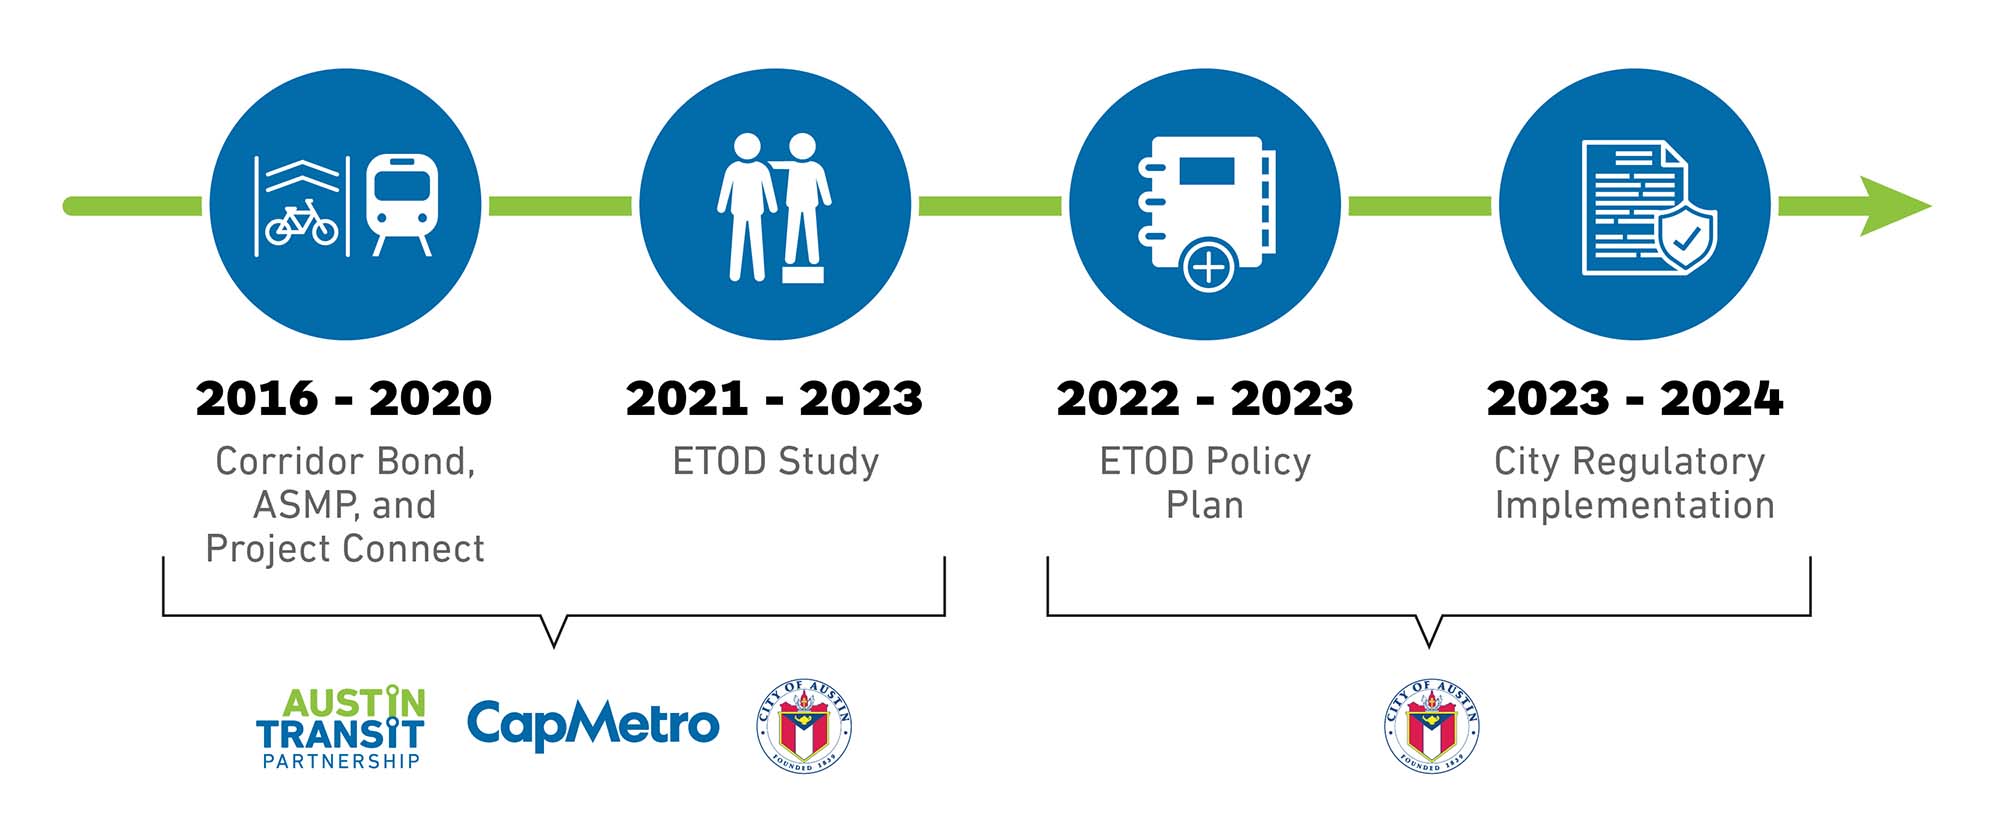 ETOD Roadmap phases from 2016 through 2024 